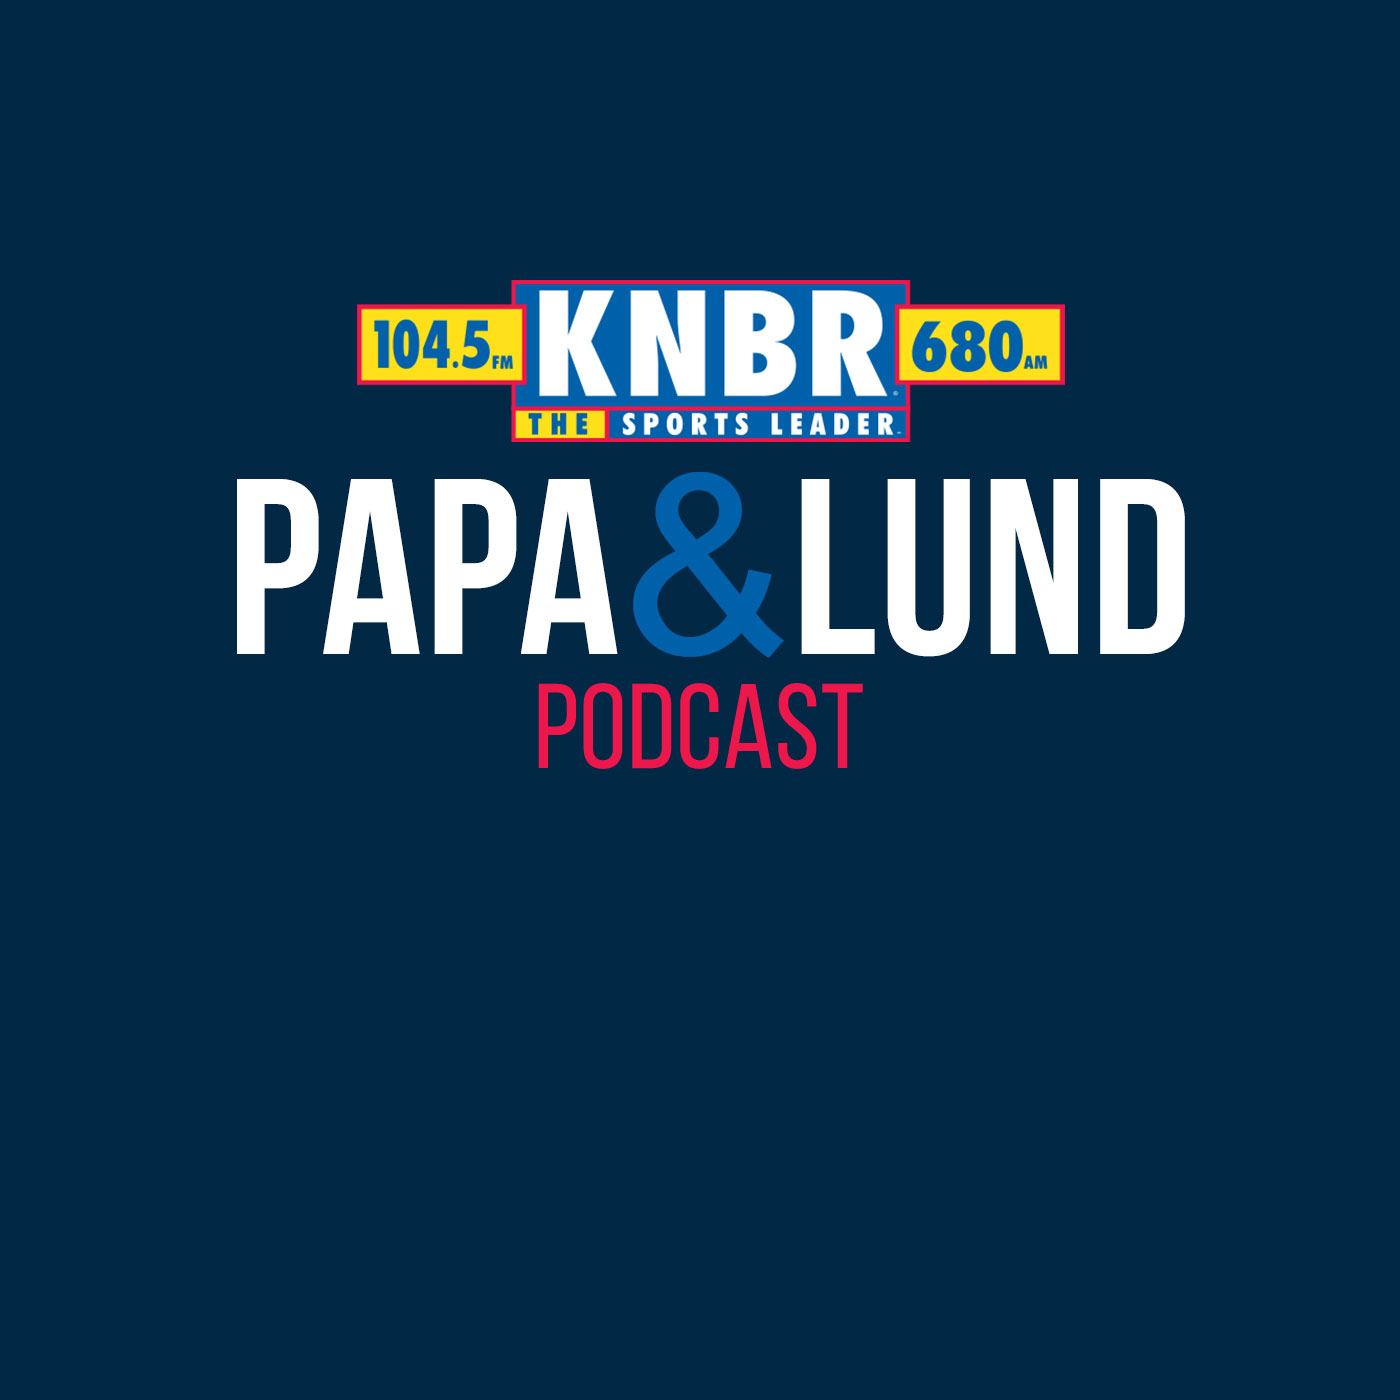 6-10 Cedric Maxwell joins Papa & Lund to discuss Draymond Greens importance for the Warriors and explains how he is actually a big fan of how he plays the game